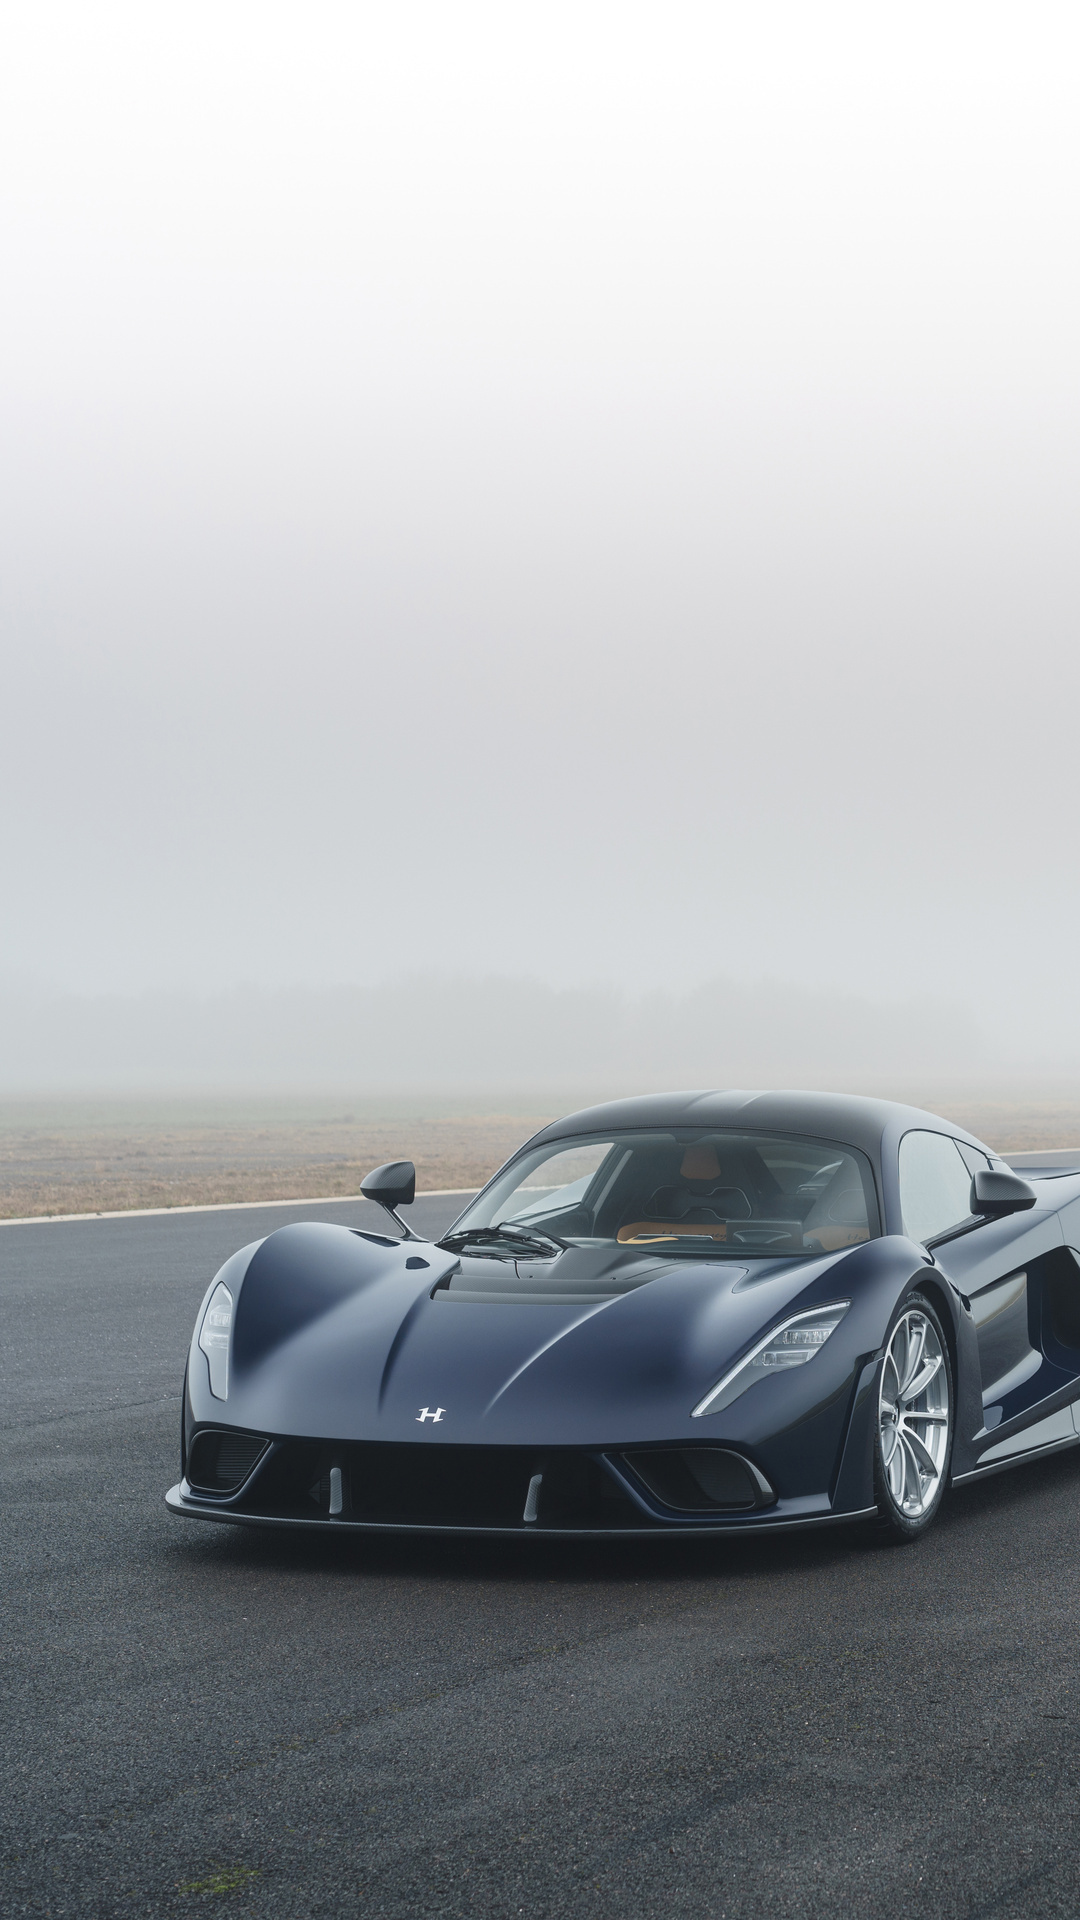 Hennessey Venom, 8k iPhone wallpapers, Astonishing details, Mobile masterpiece, 1080x1920 Full HD Phone